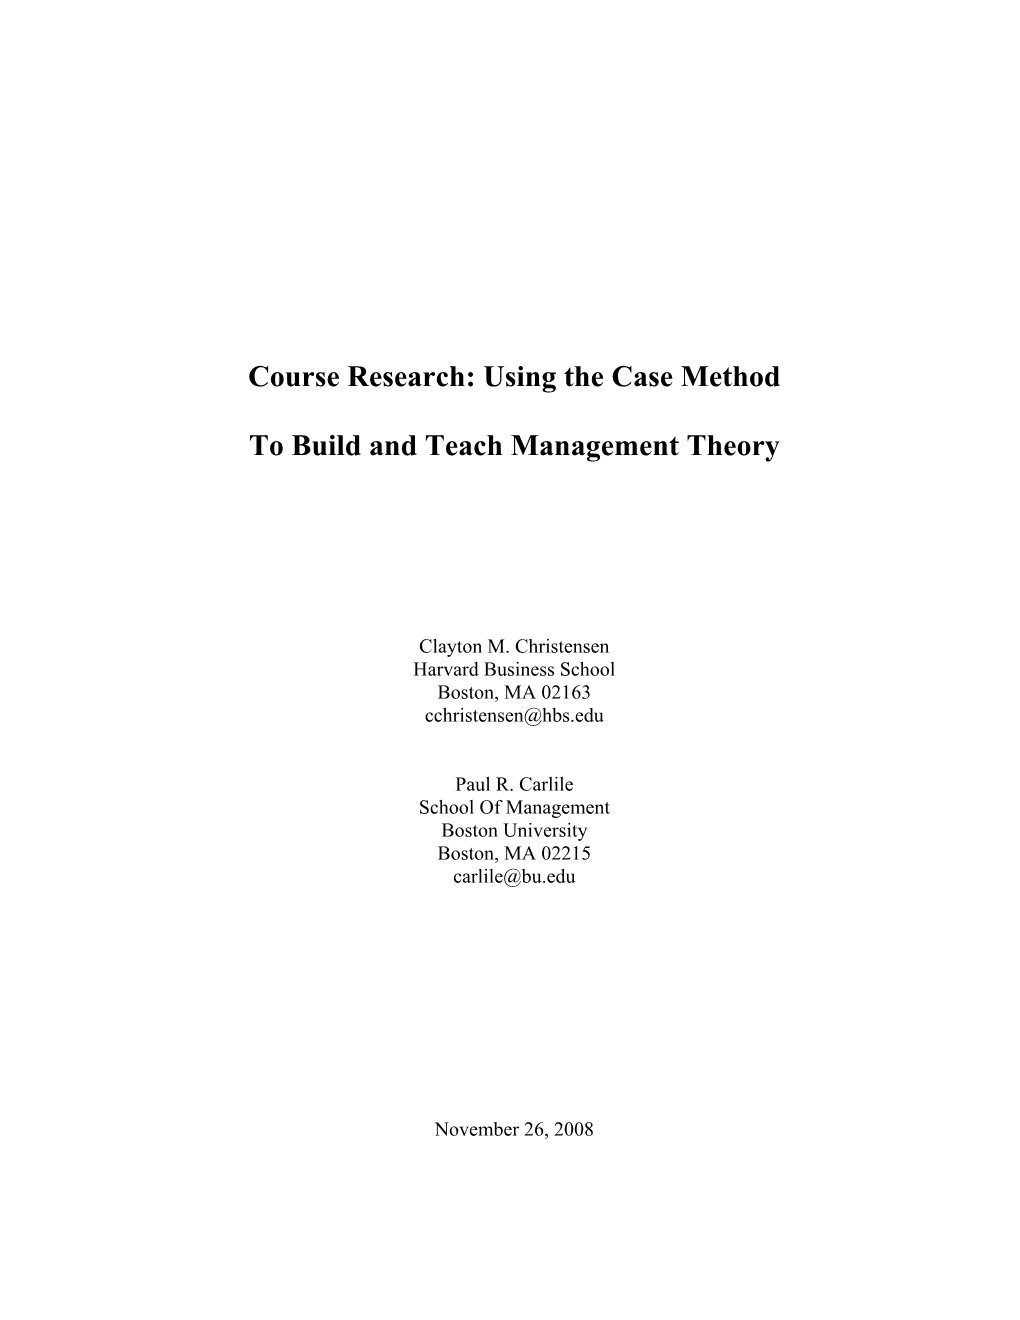 Course Research: Using the Case Method to Build and Teach Management Theory